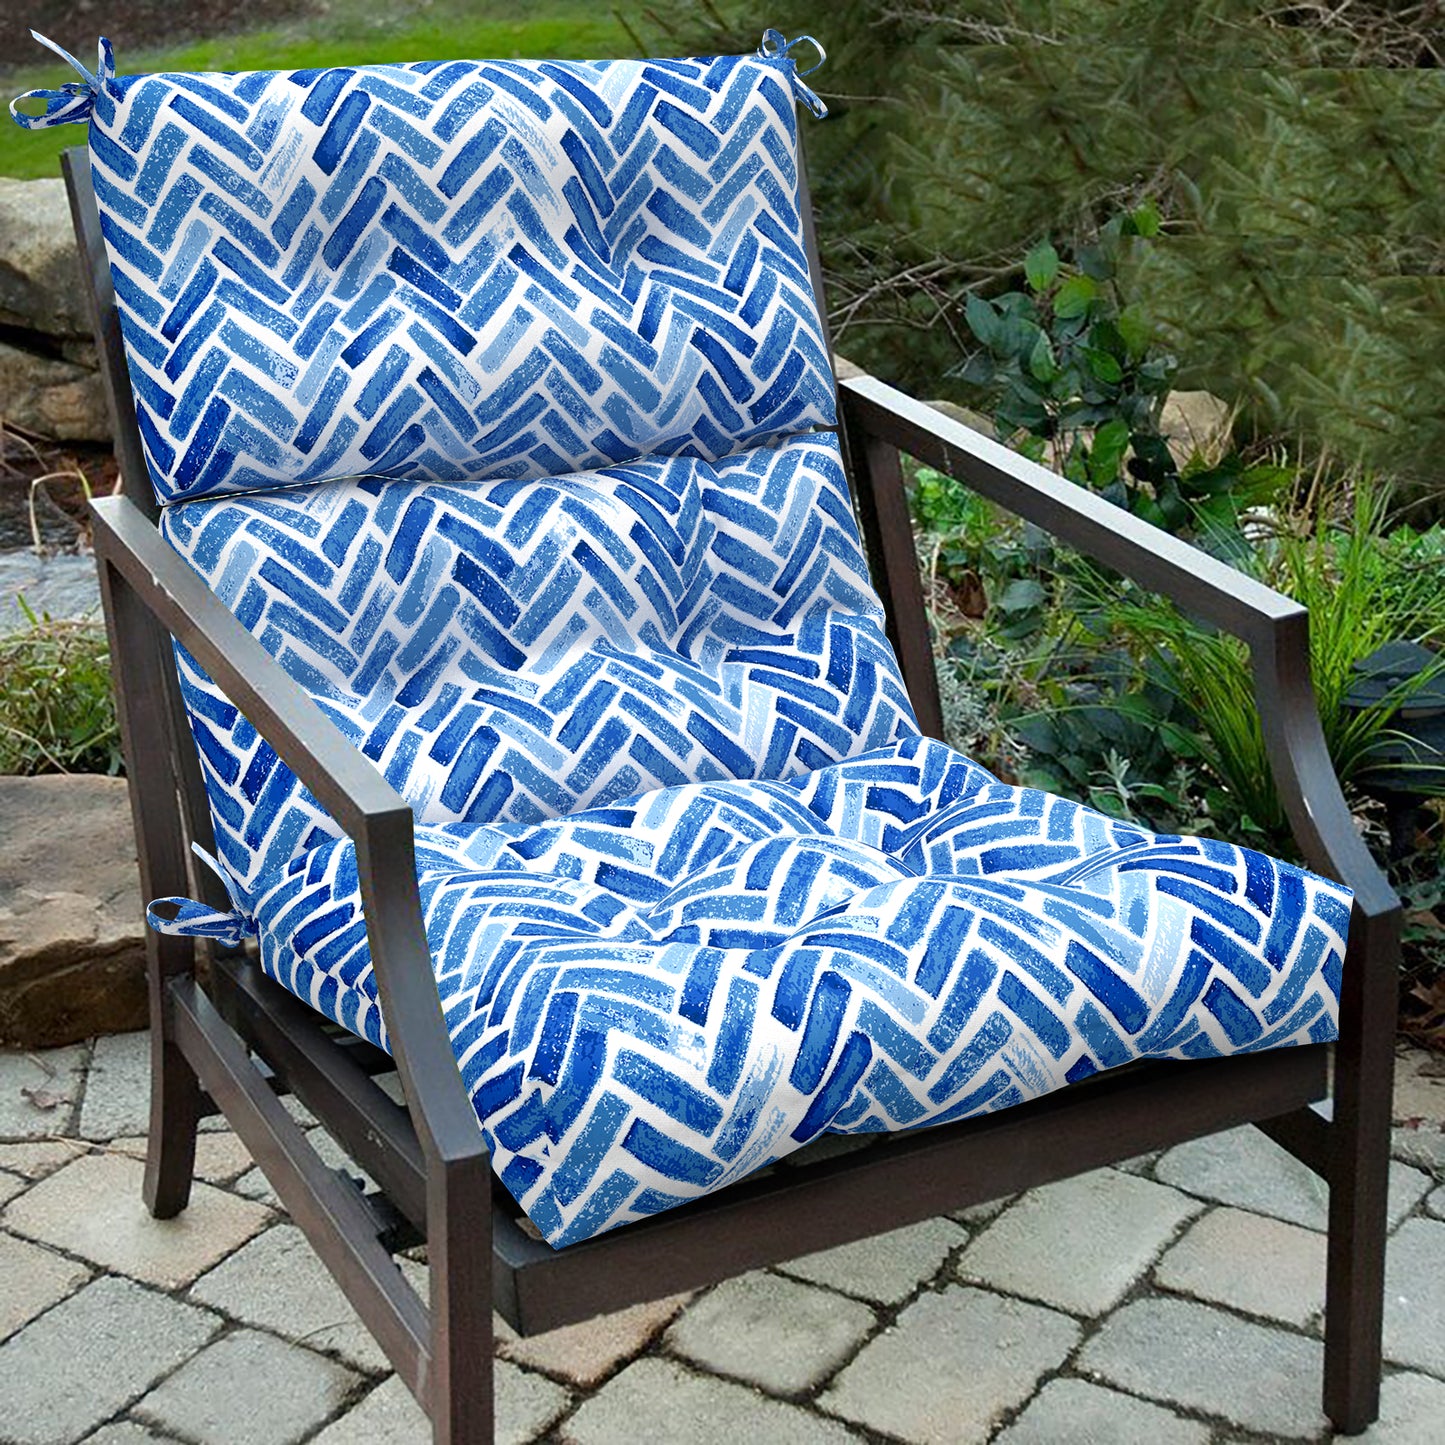 Melody Elephant Outdoor Tufted High Back Chair Cushions, Water Resistant Rocking Seat Chair Cushions 2 Pack, Adirondack Cushions for Patio Home Garden, 22" W x 20" D, Blue Bricks